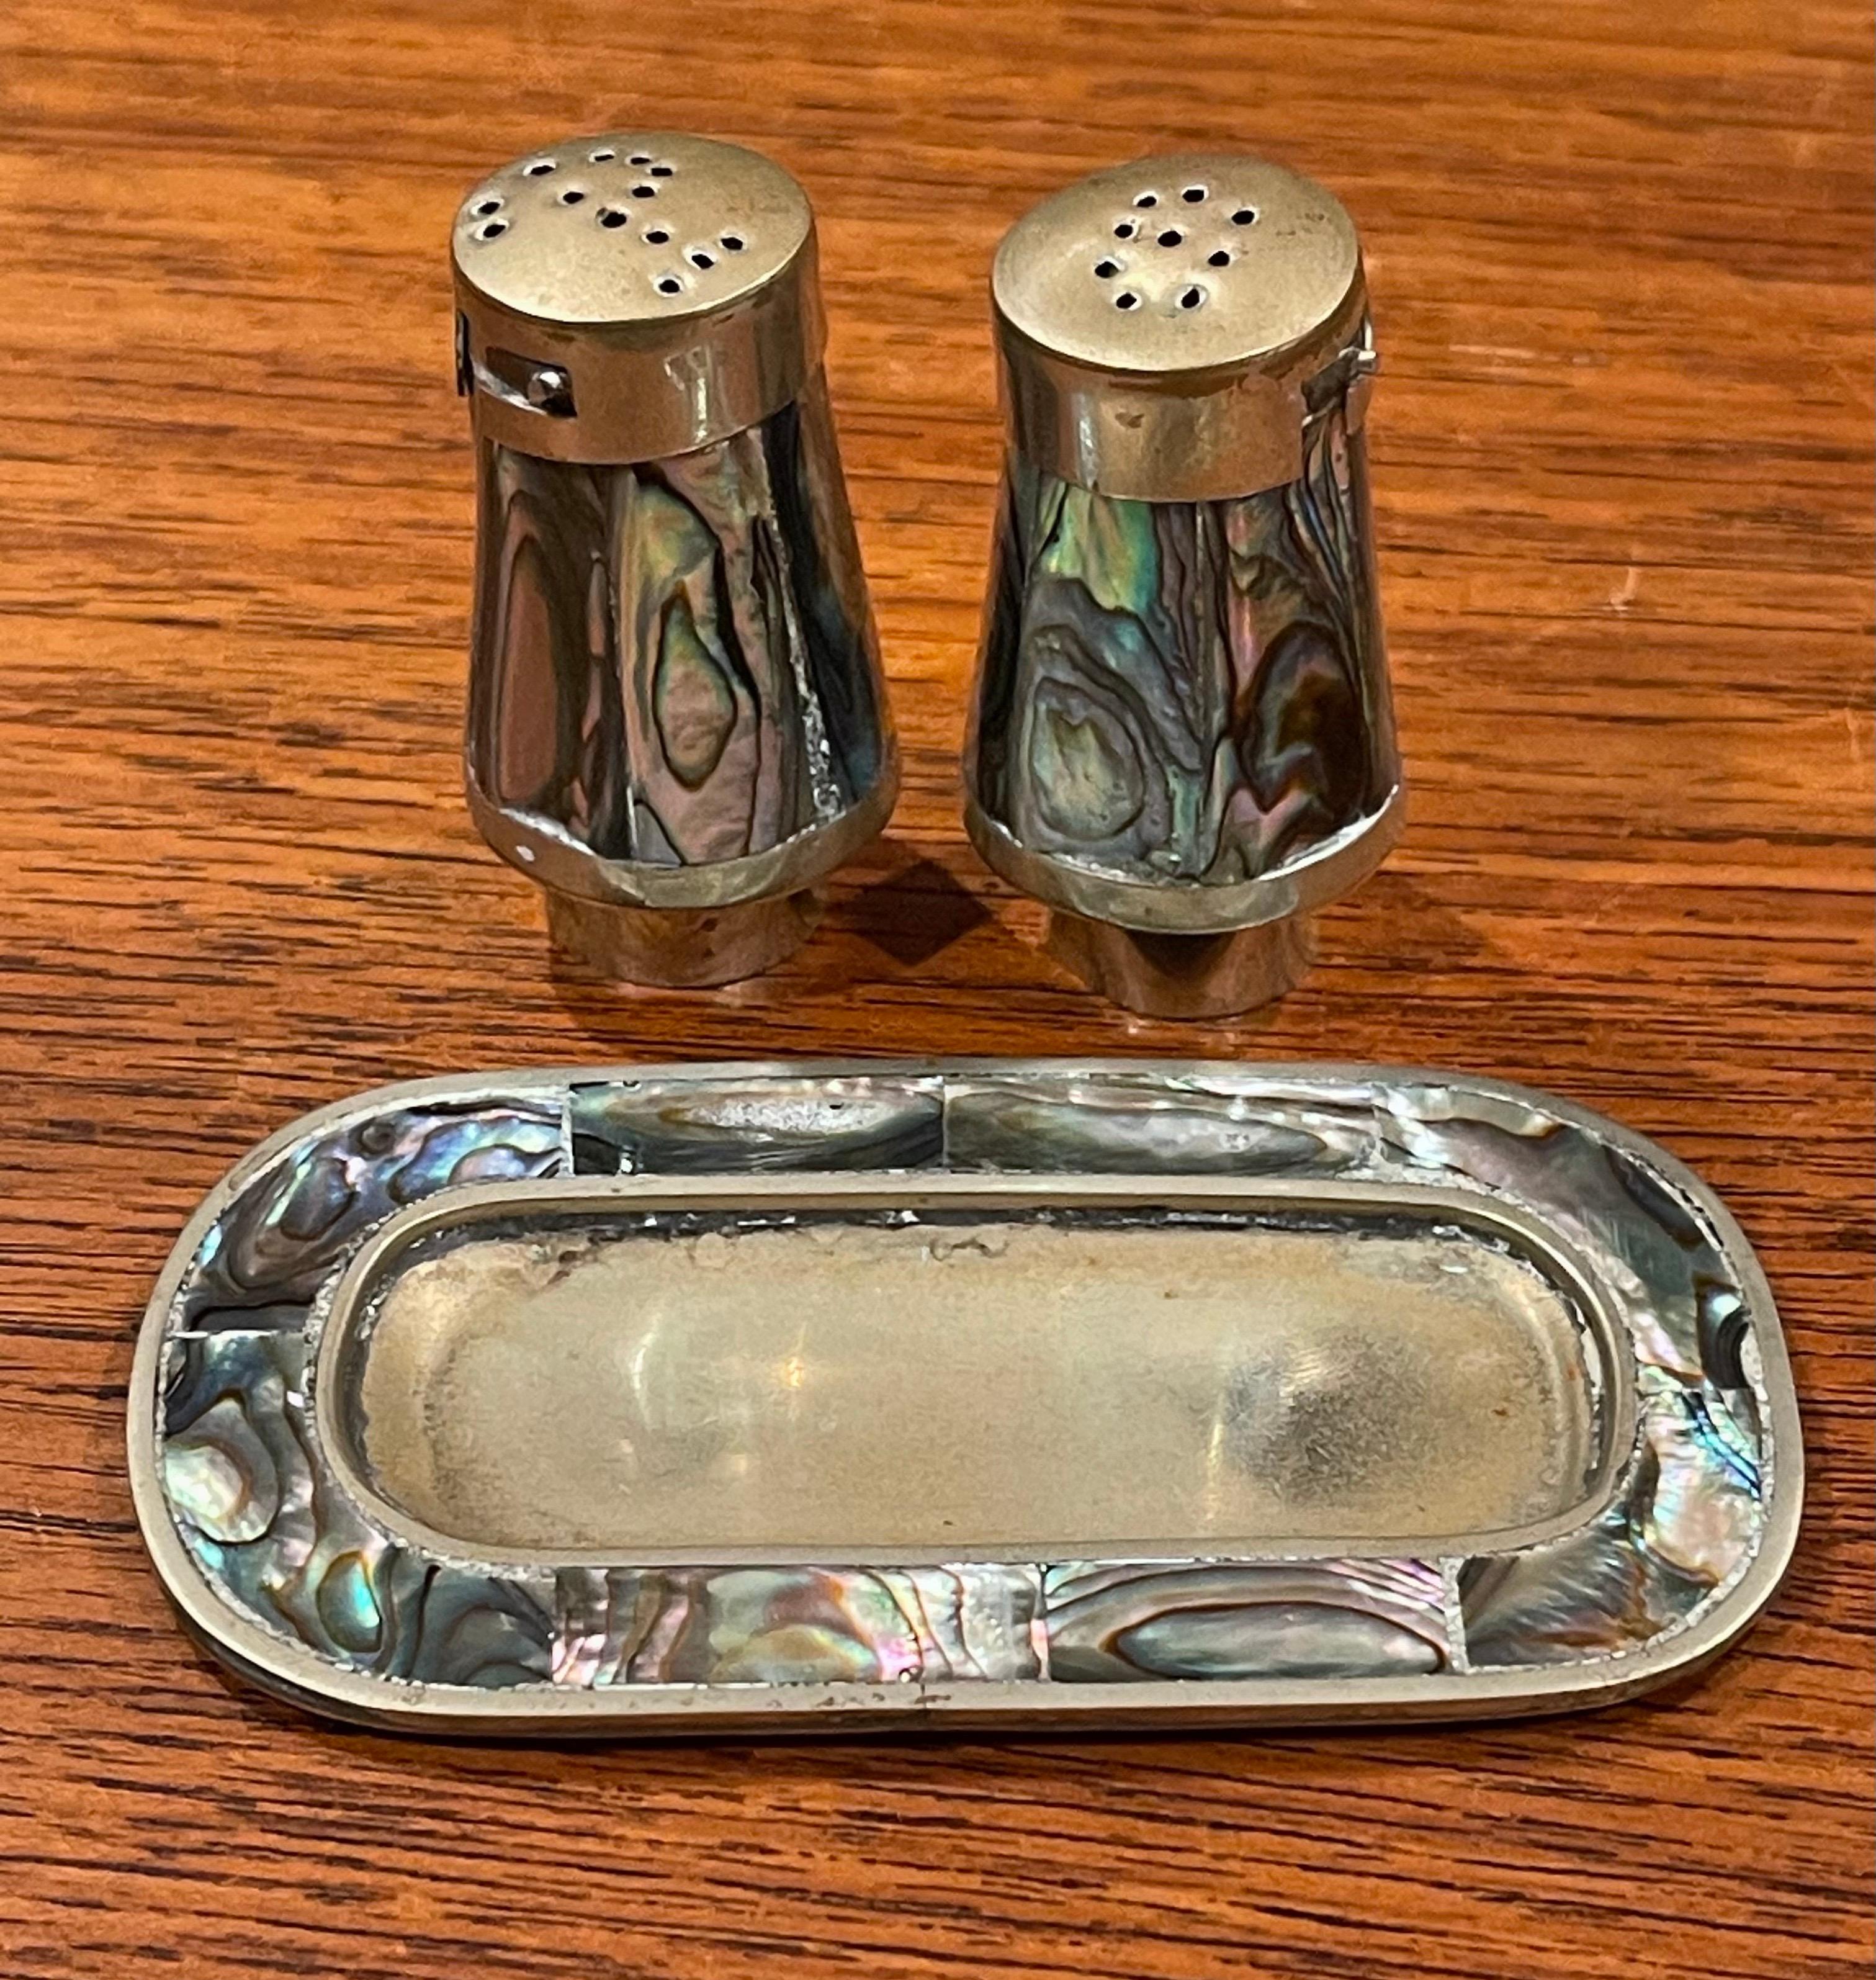 Pair of petite Mexican brass & alpaca salt and pepper shakers, circa 1970s. The set is in good vintage condition with removable lids; the tray measures 3.5